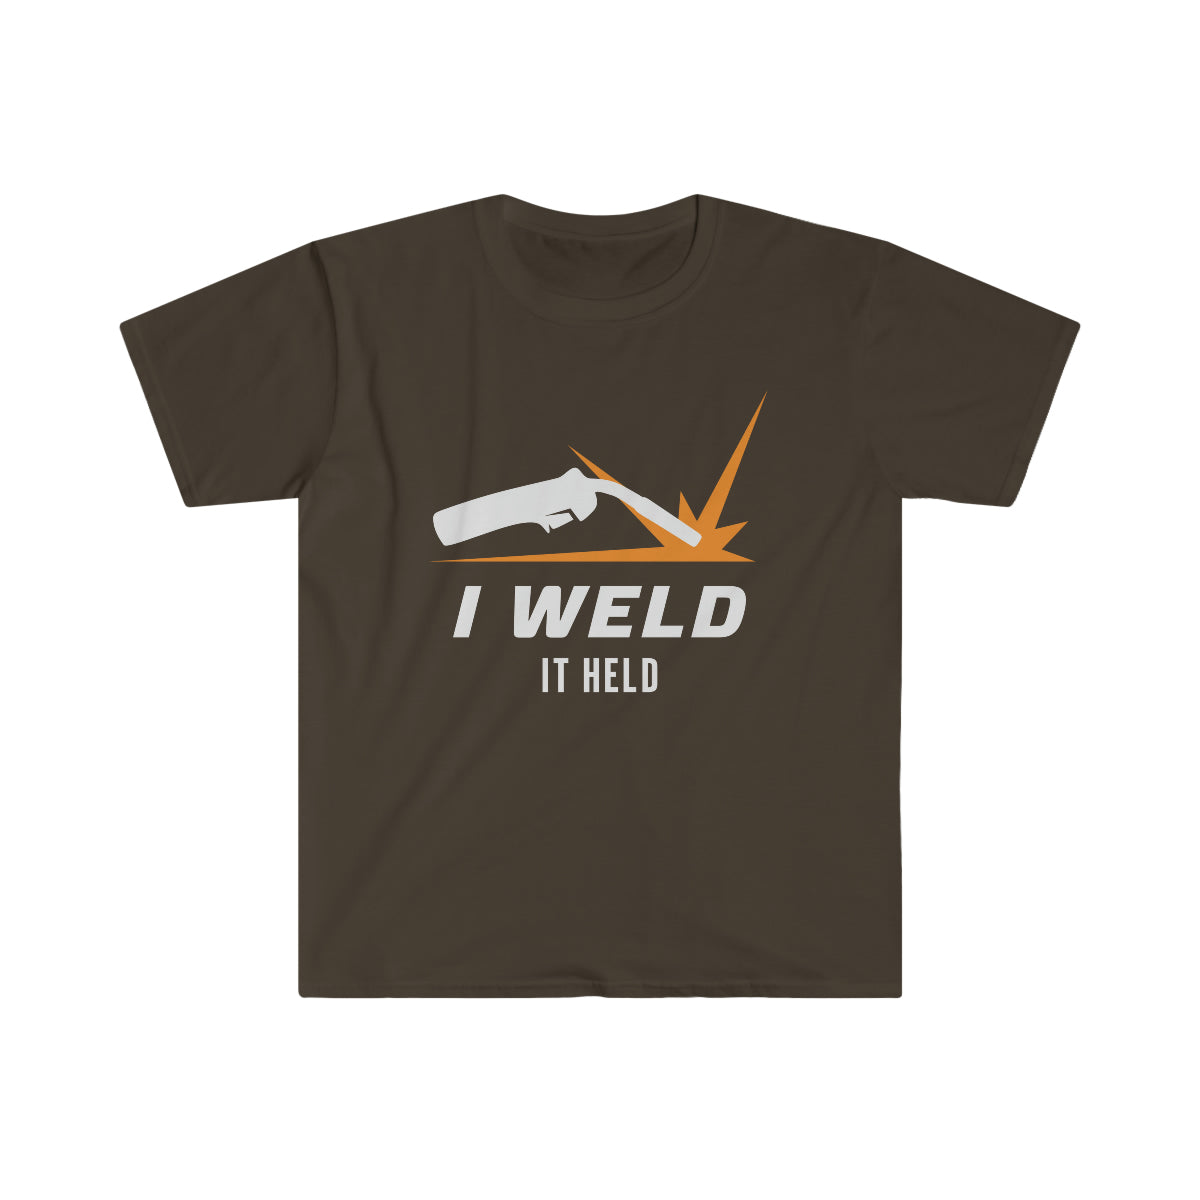 I Weld. It Held - T-shirt - MOVE Bumpers - Brown